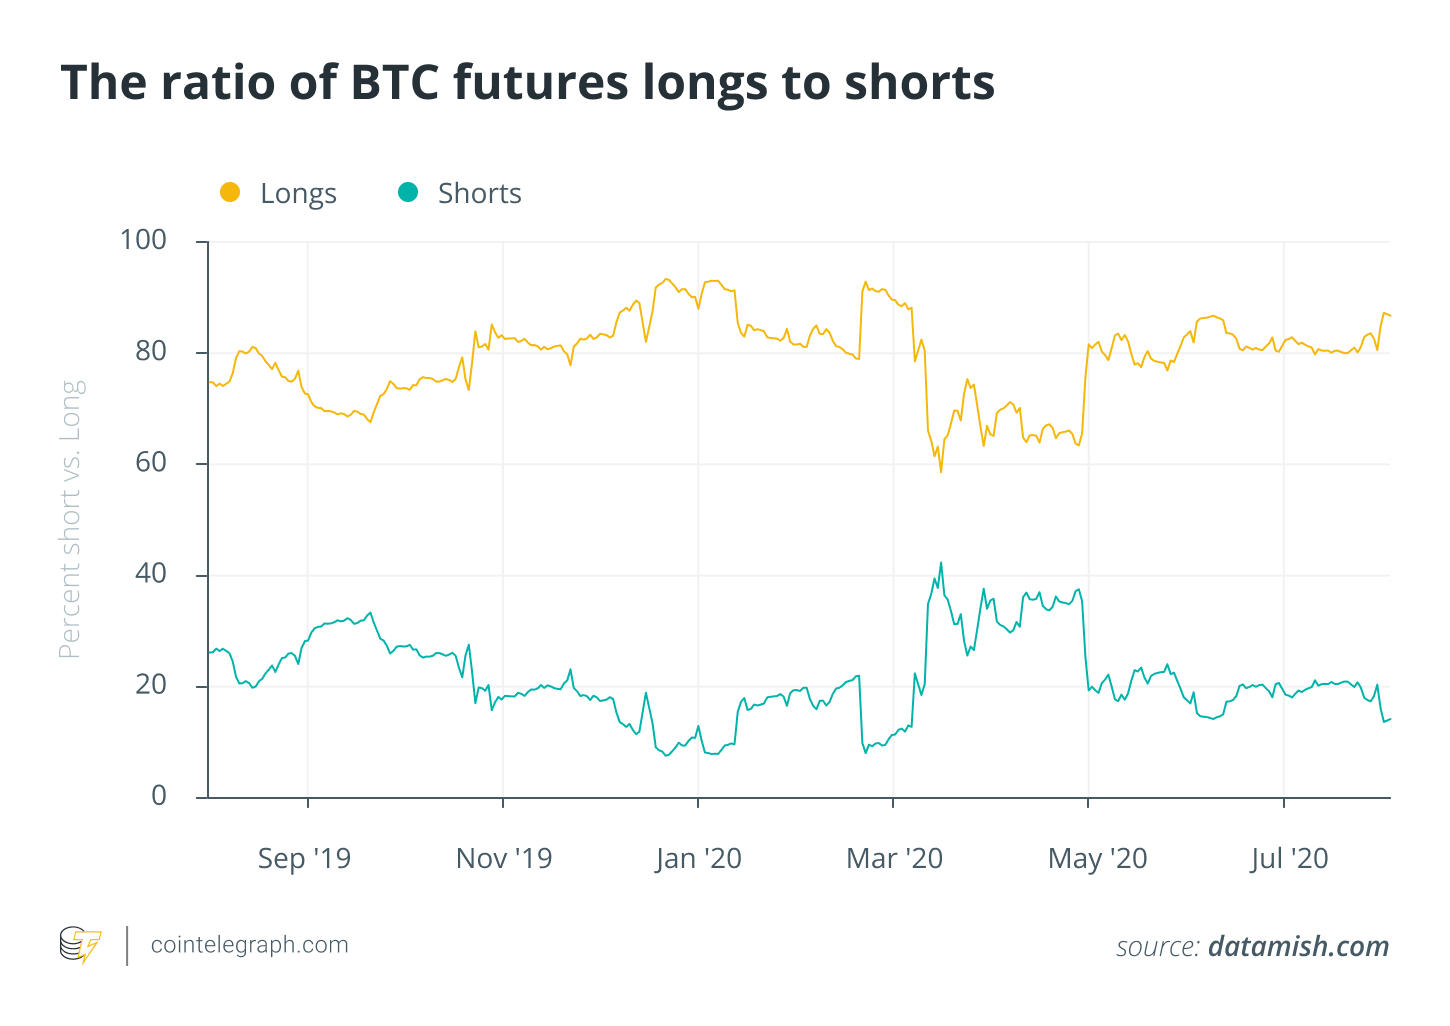 The ratio of BTC futures longs to shorts